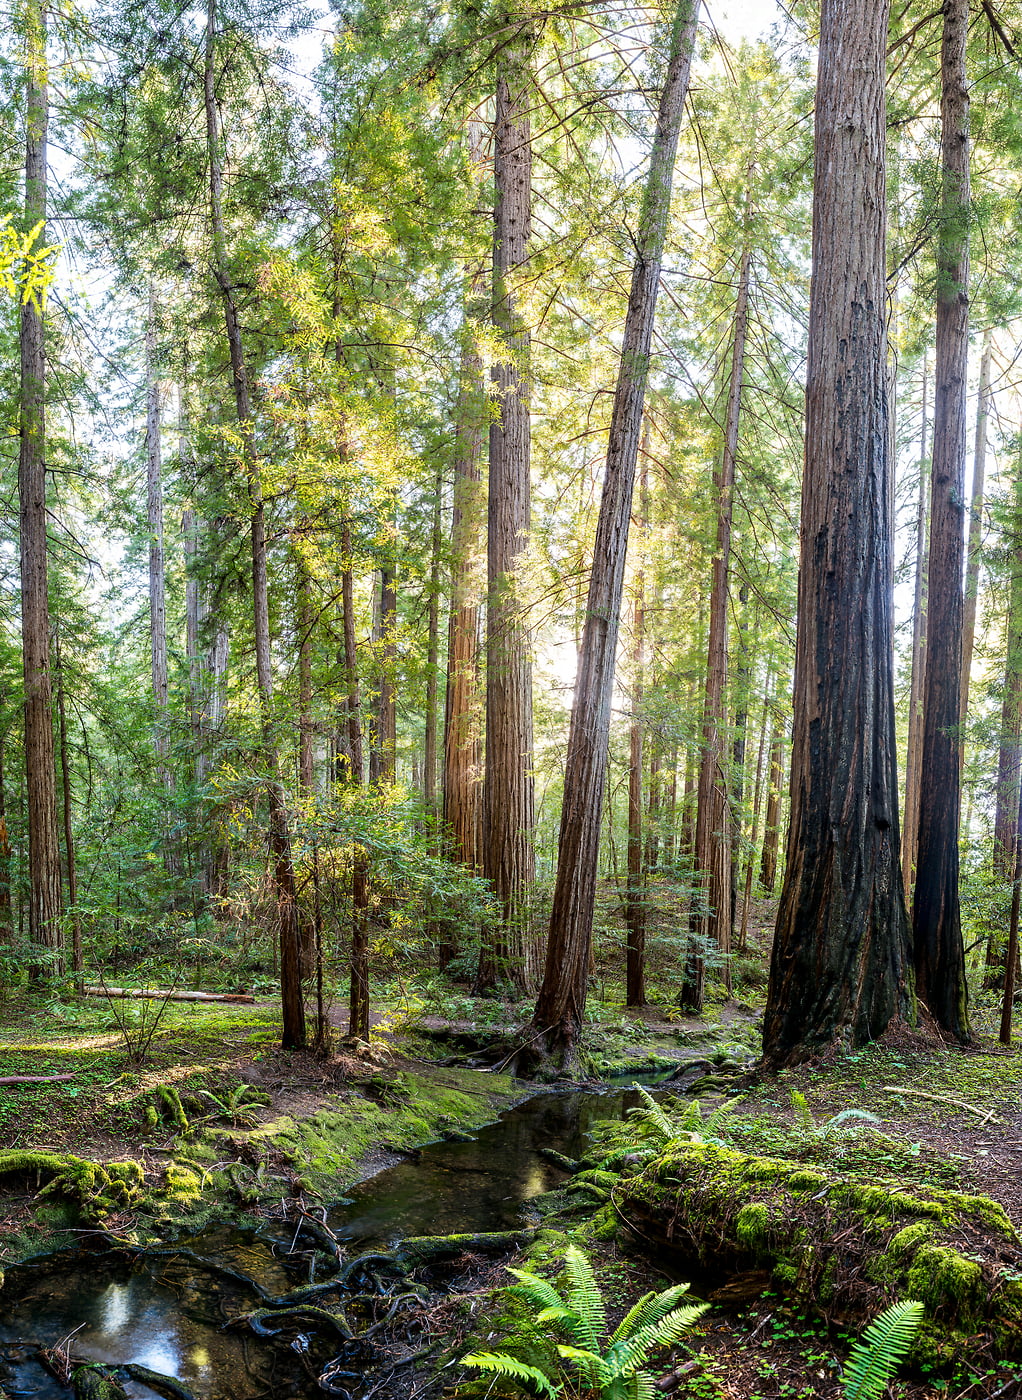 604 megapixels! A very high resolution, large-format VAST photo of a redwood forest with a creek; fine art nature photo created by Justin Katz in Montgomery Woods State Reserve, California